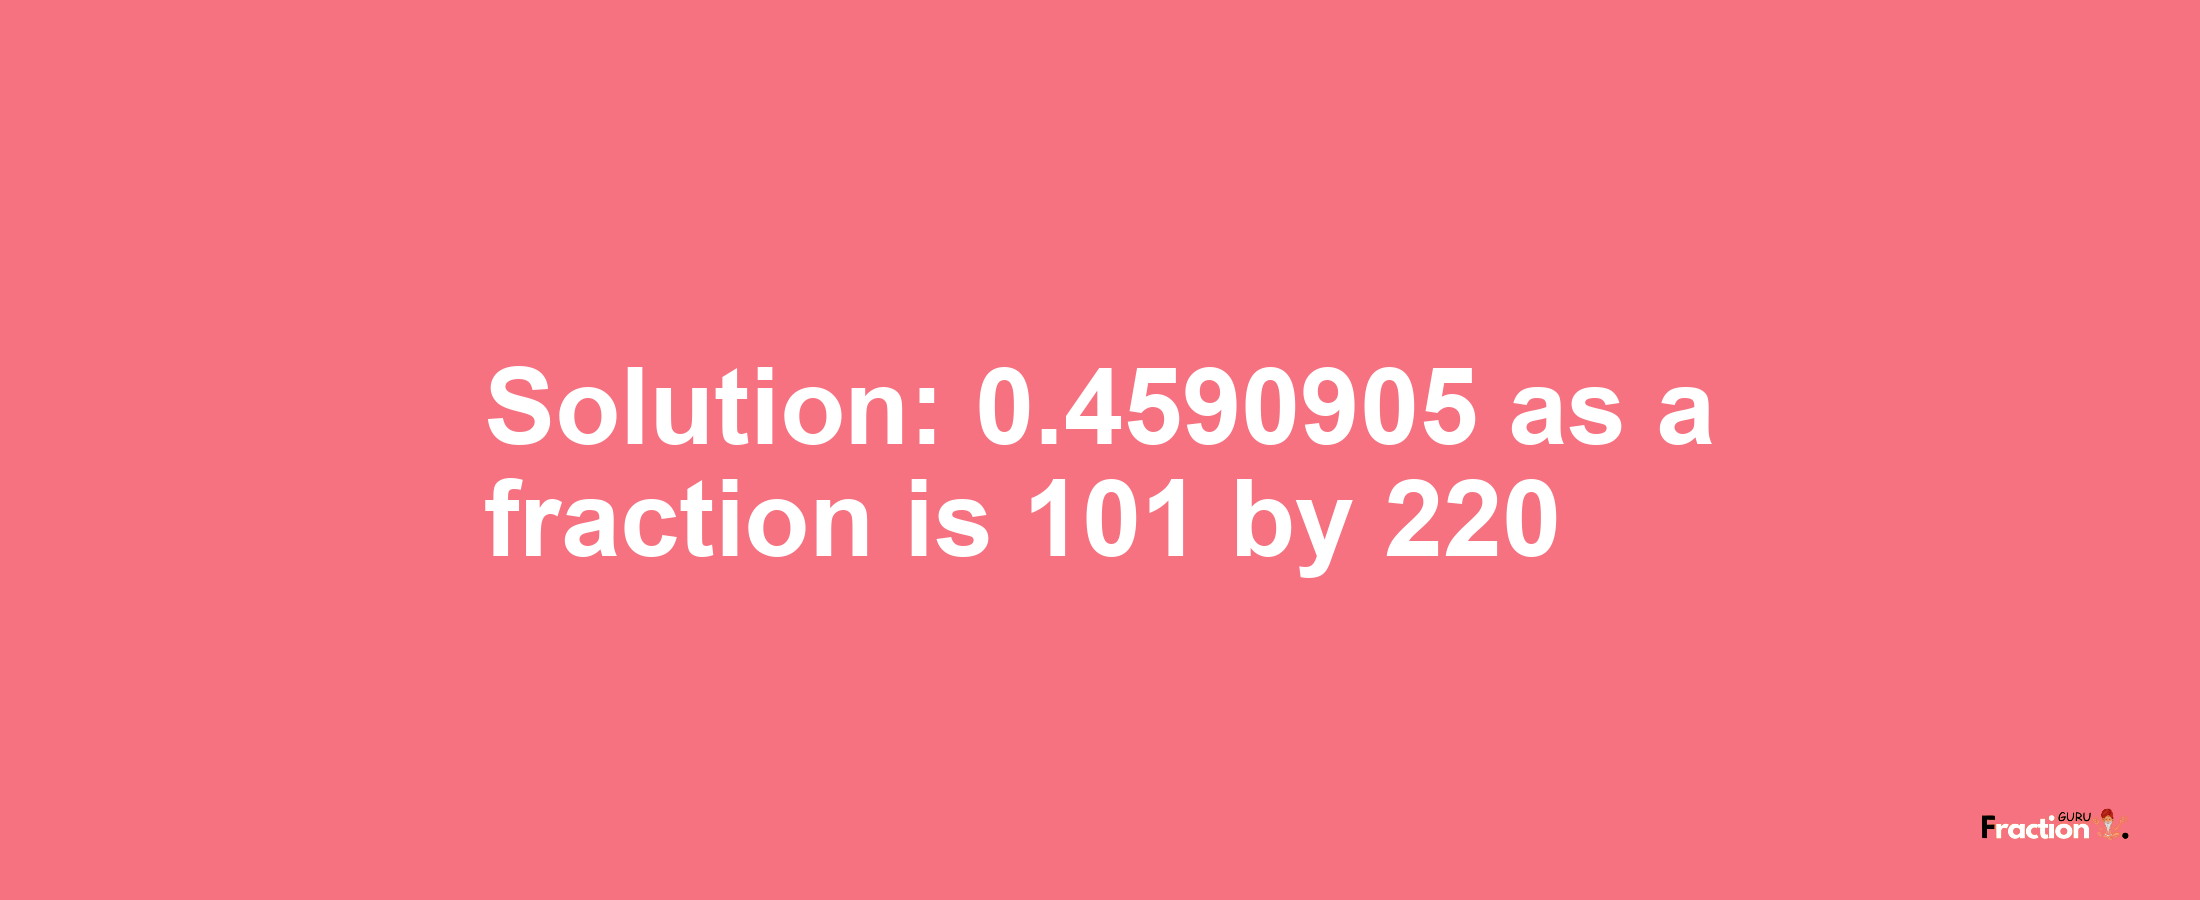 Solution:0.4590905 as a fraction is 101/220